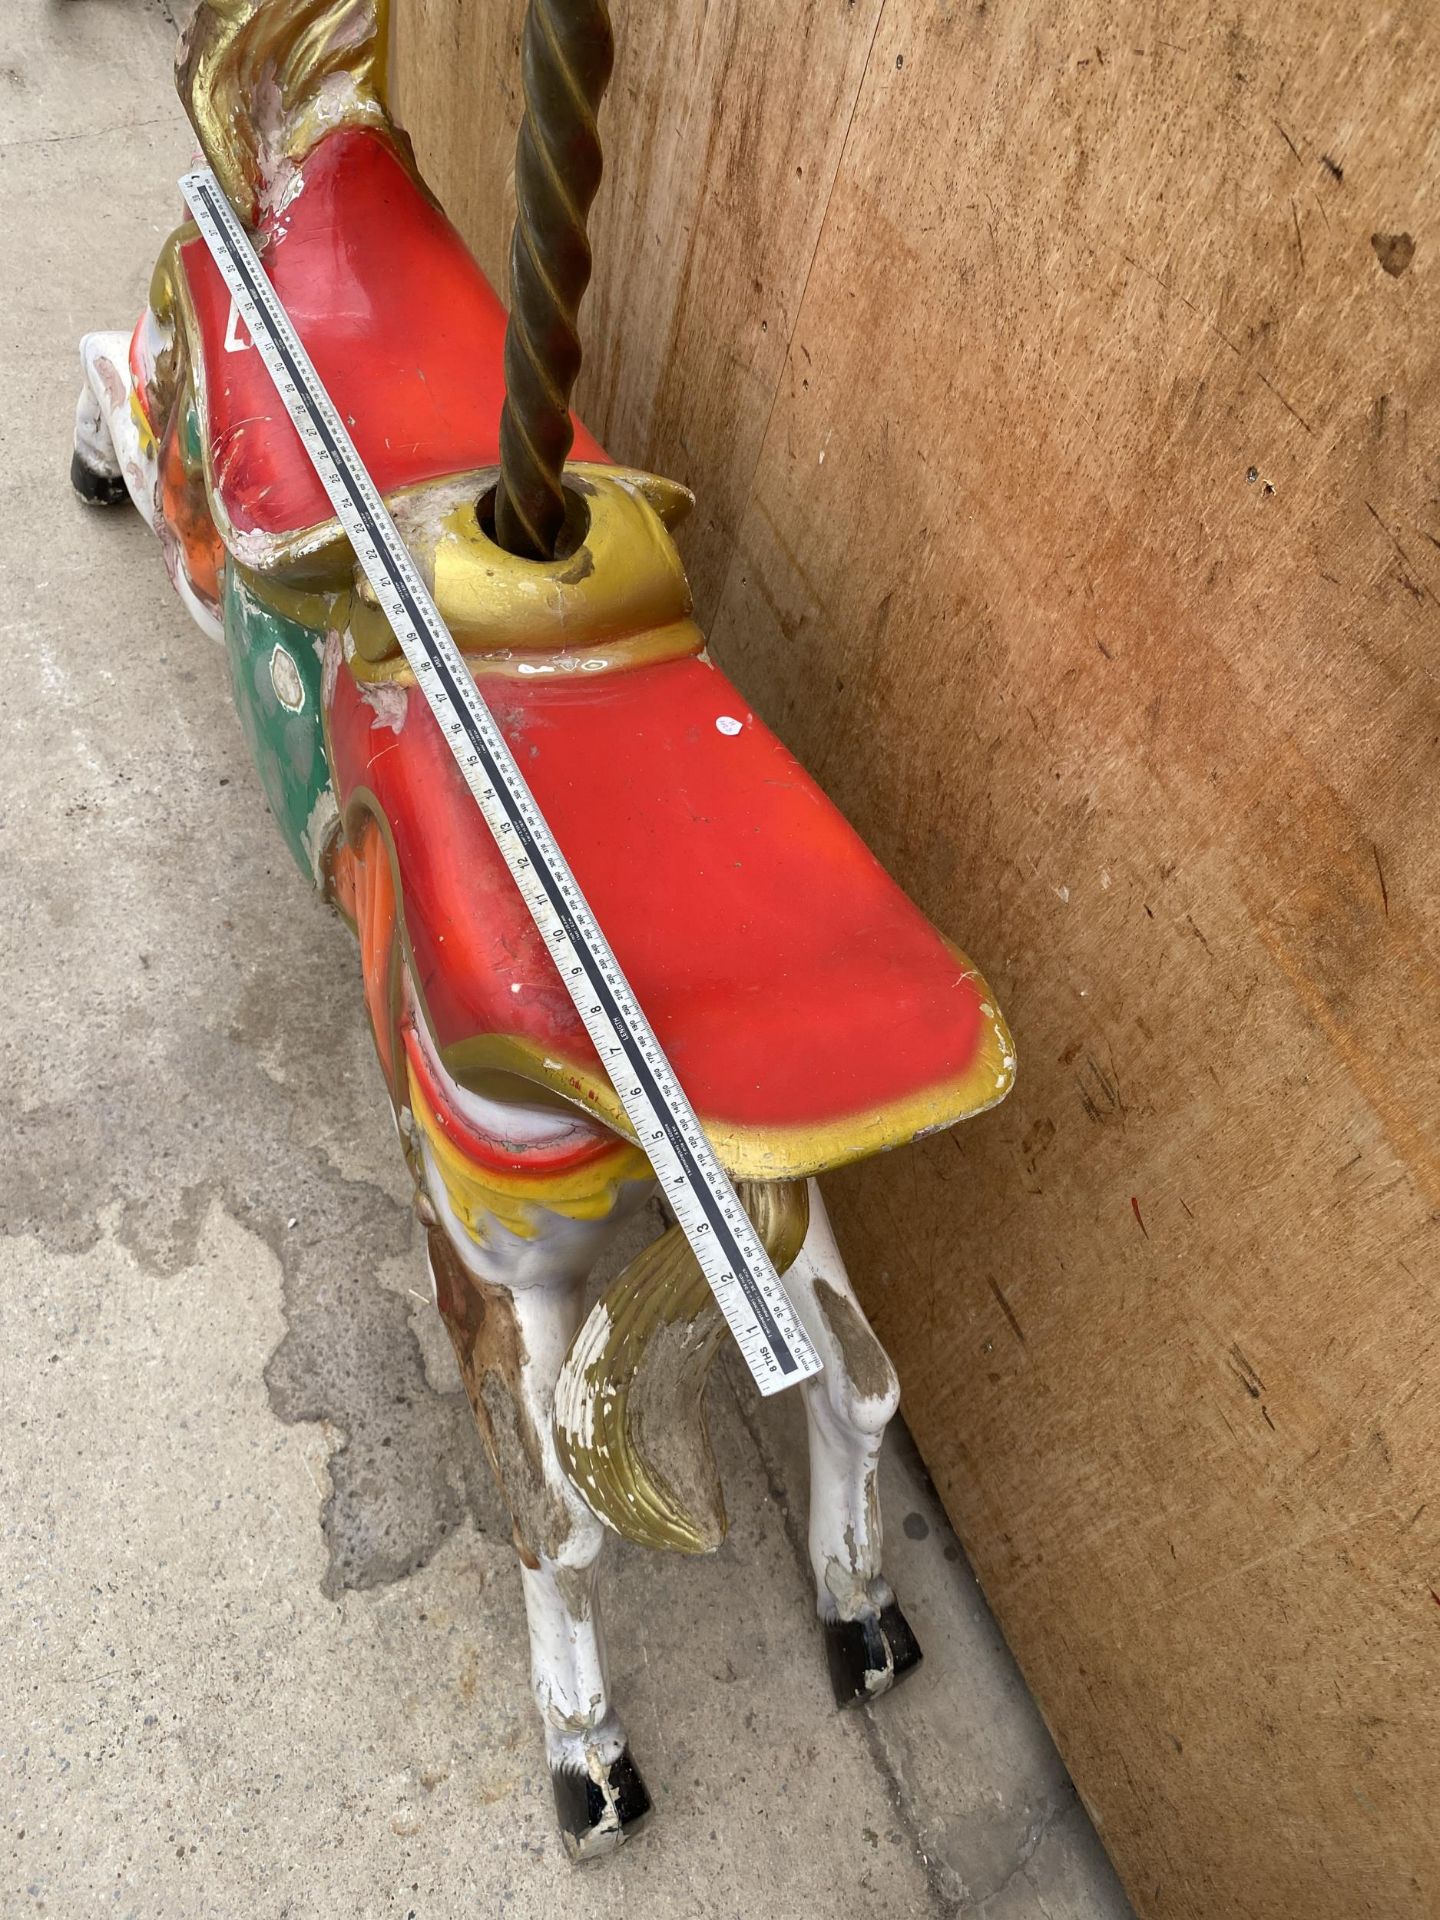 A BELIEVED ORIGINAL EX FAIRGROUND RIDE GALLOPER WITH DOUBLE SEAT AND TURNED BRASS POLE - Image 8 of 8